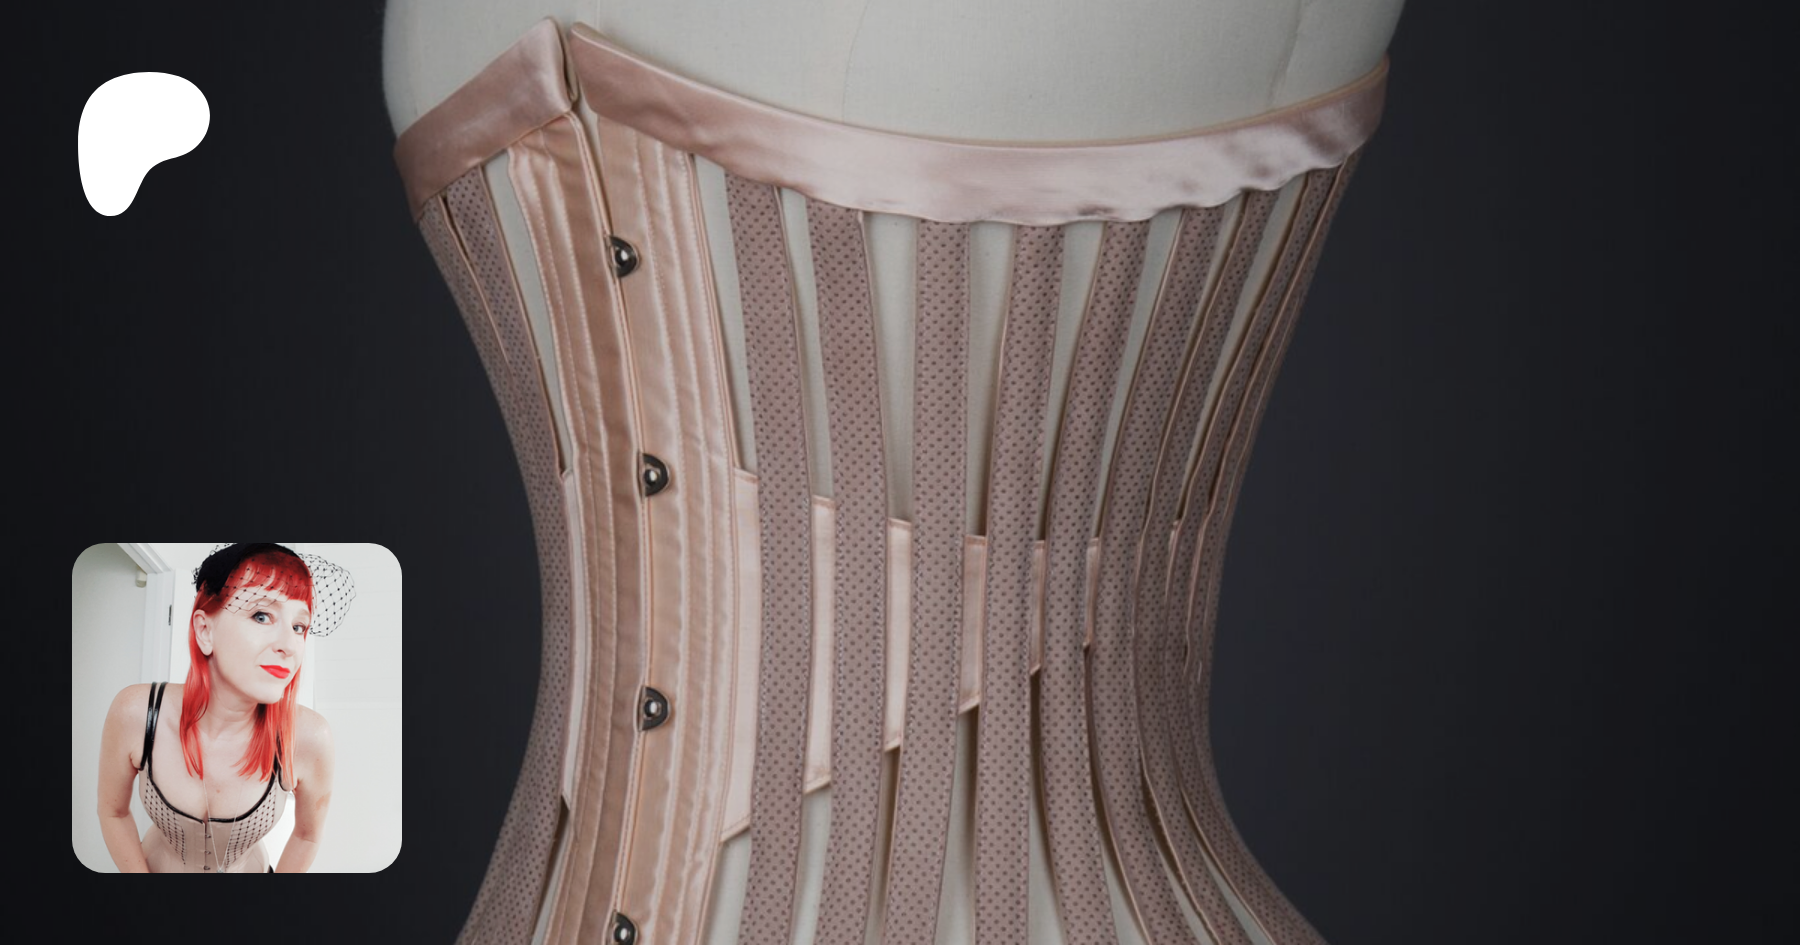 Polly Corset Designed by Lucy's Corsetry Hourglass Silhouette in Black